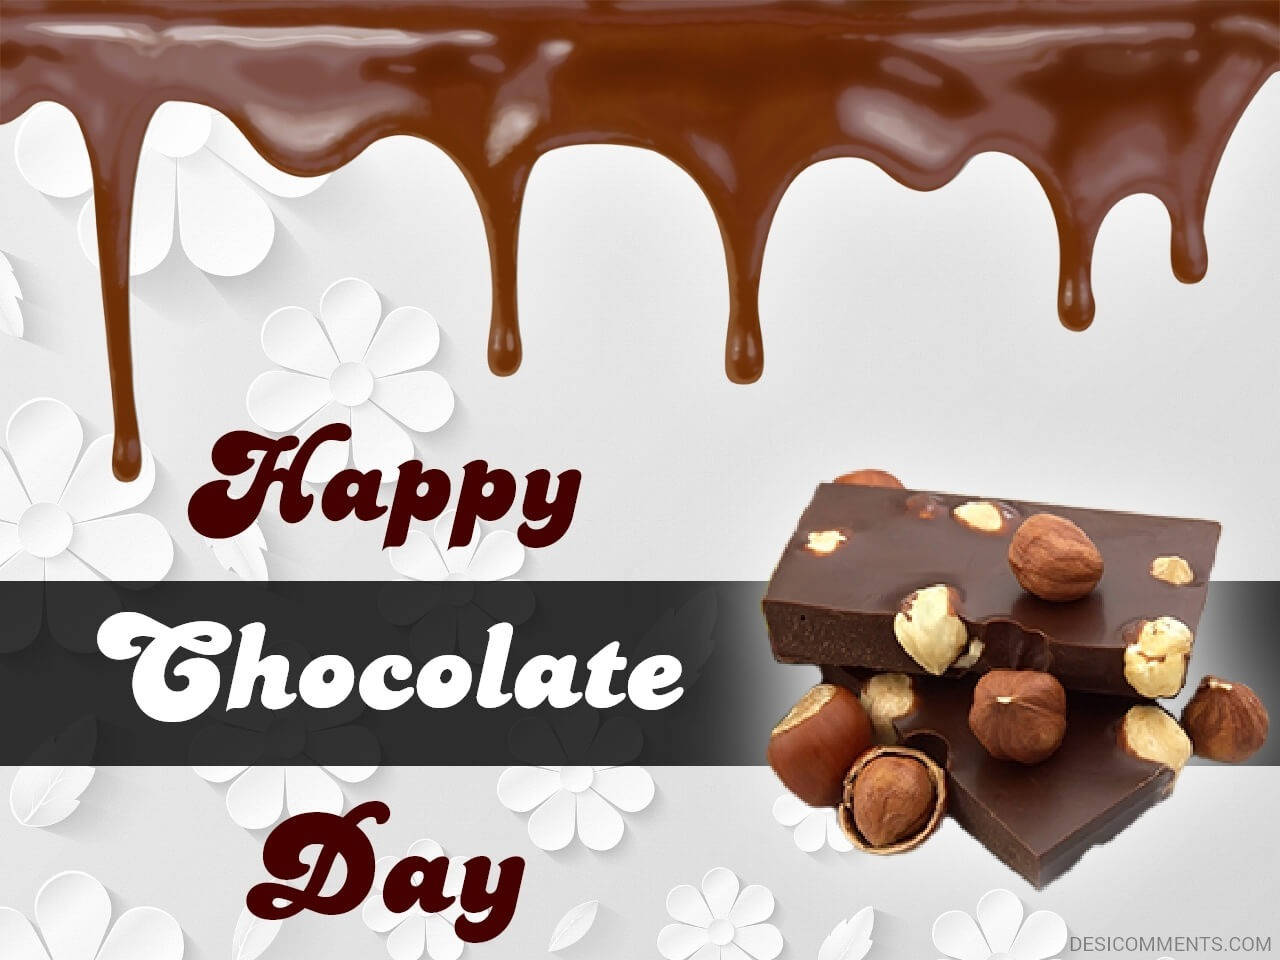 Download Happy Chocolate Day Nuts Wallpaper | Wallpapers.com